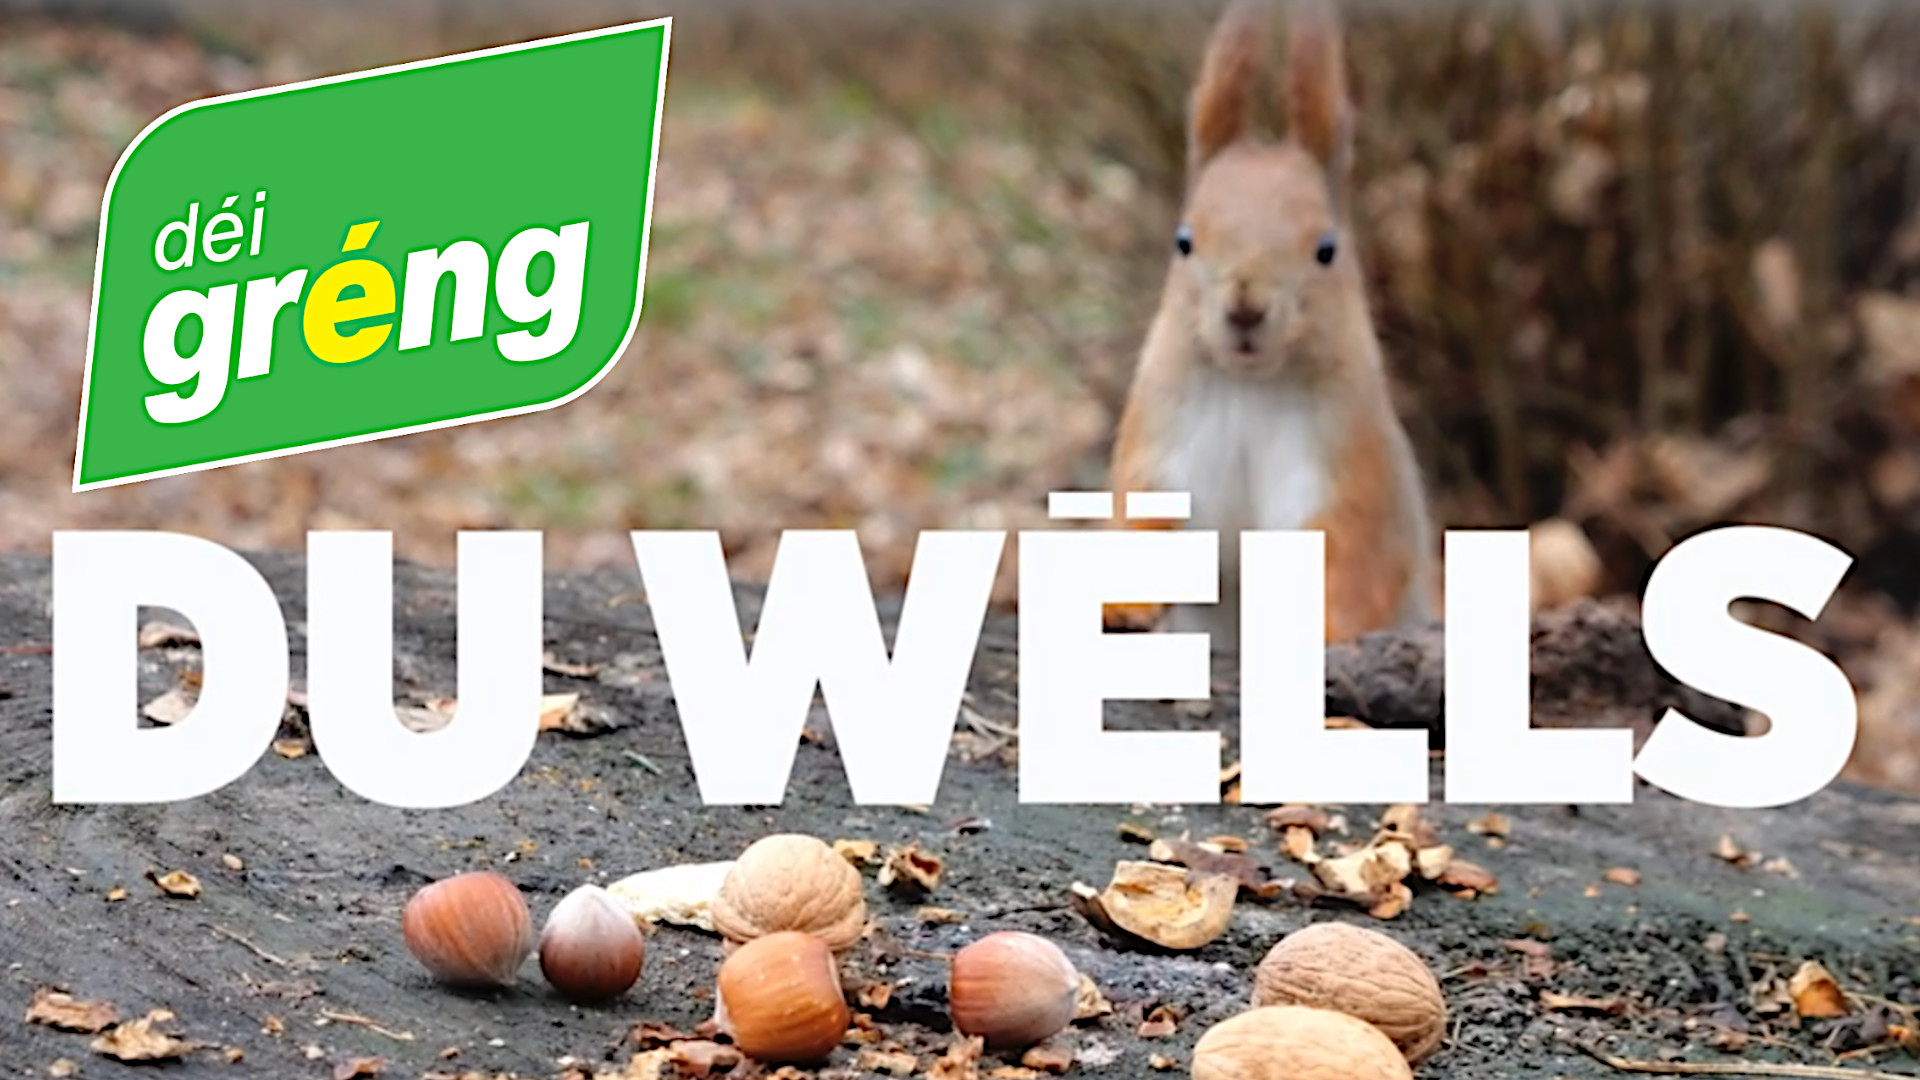 Wurst Greng / Green Party